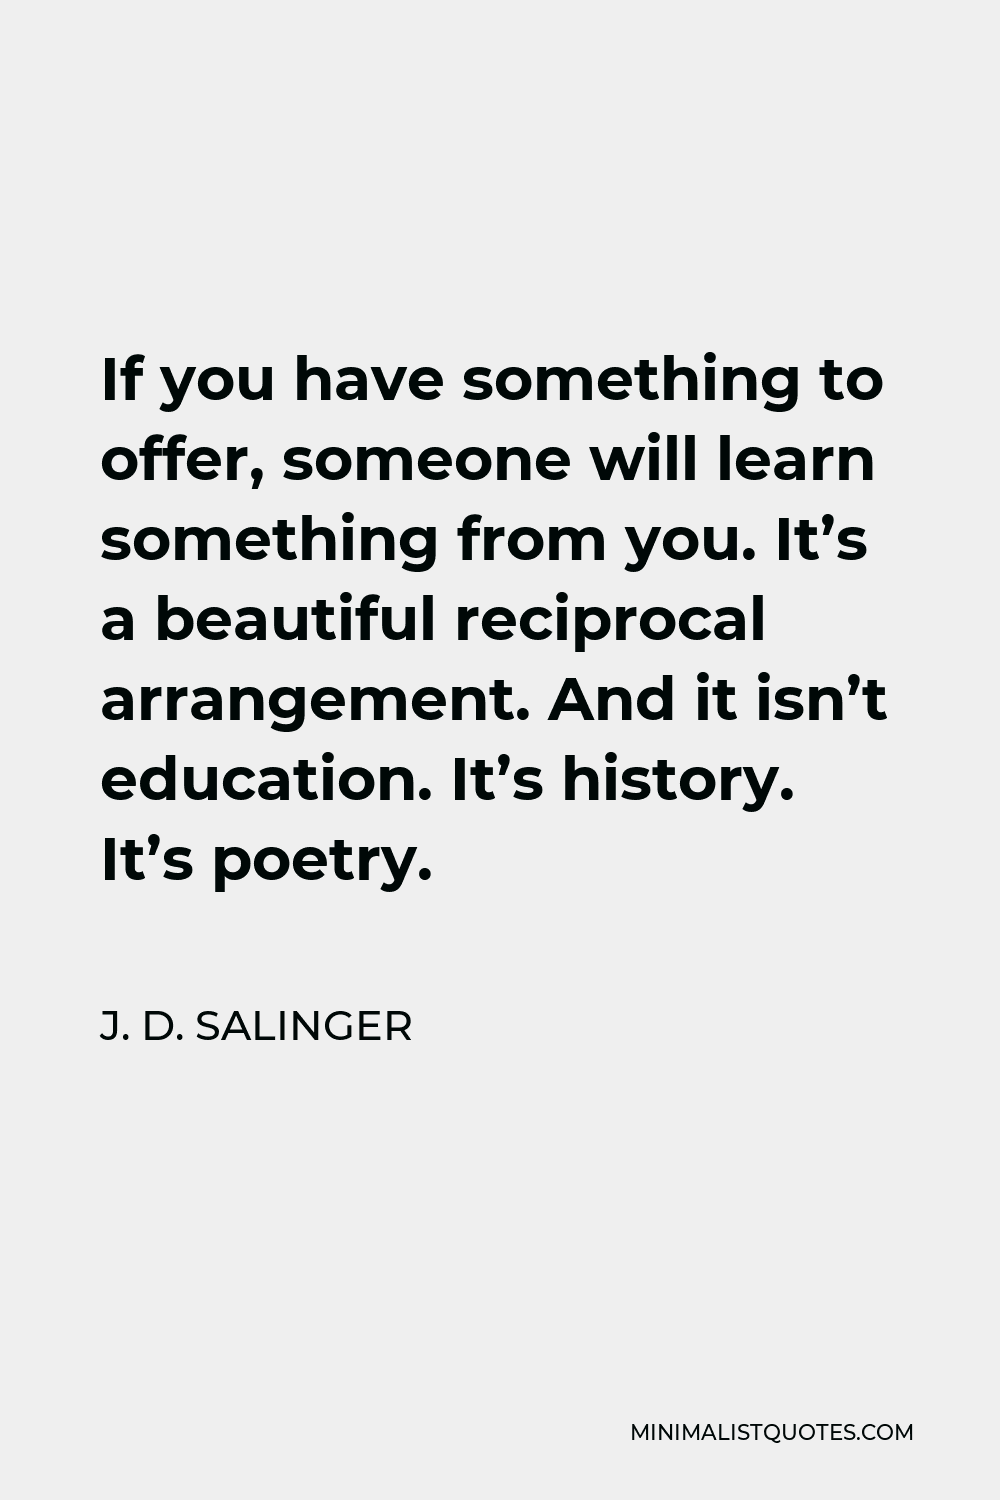 J. D. Salinger Quote - If you have something to offer, someone will learn something from you. It’s a beautiful reciprocal arrangement. And it isn’t education. It’s history. It’s poetry.